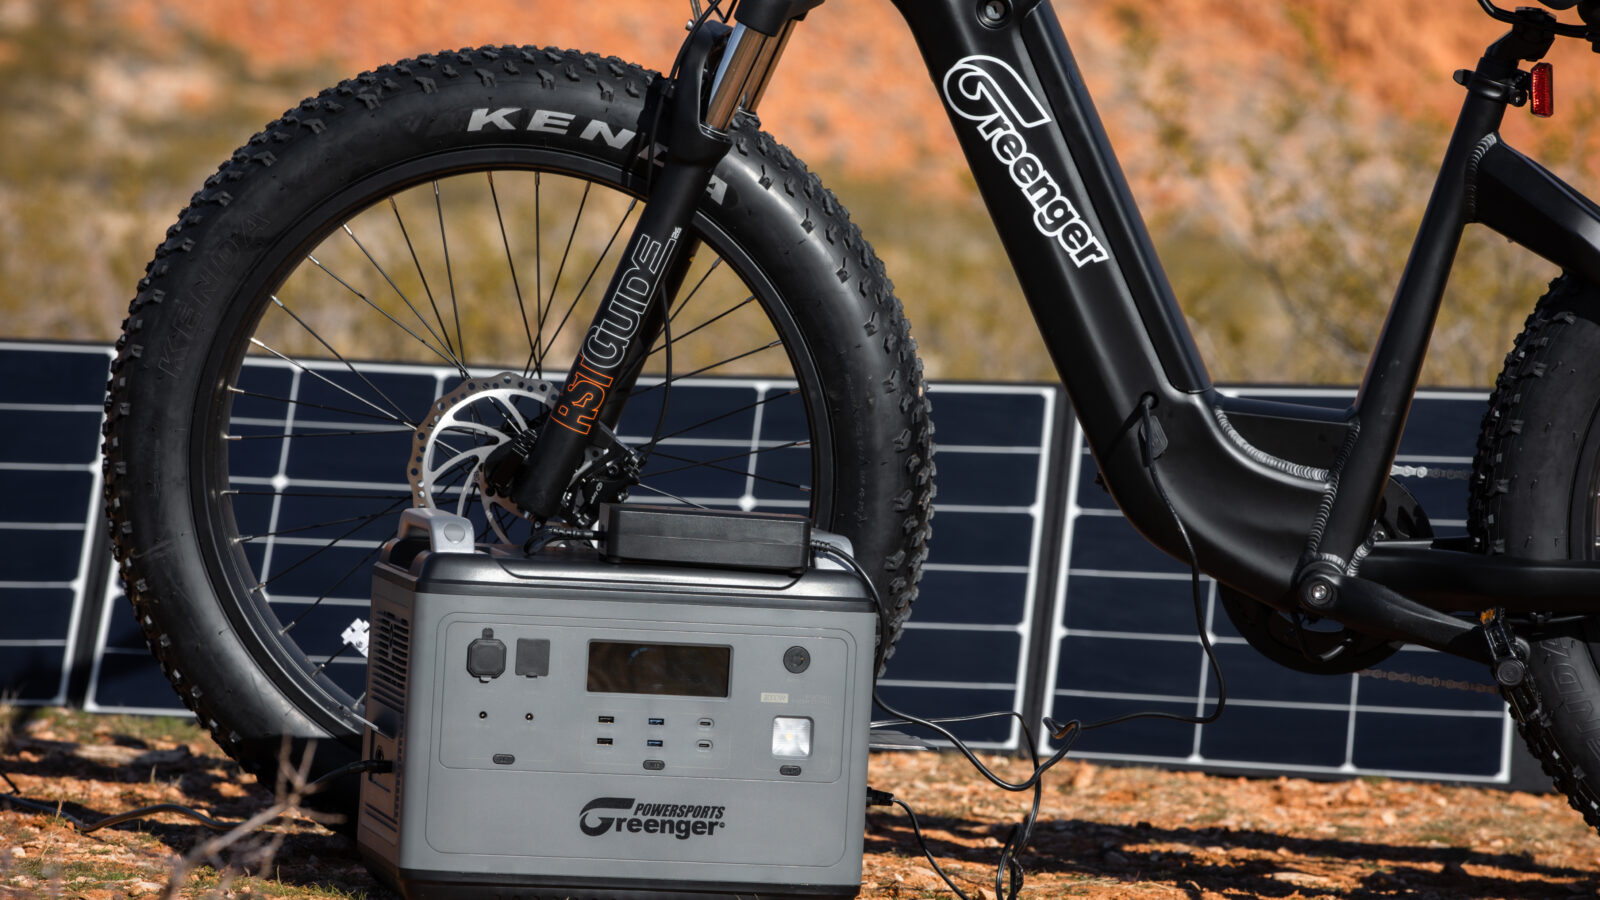 2000w portable power station